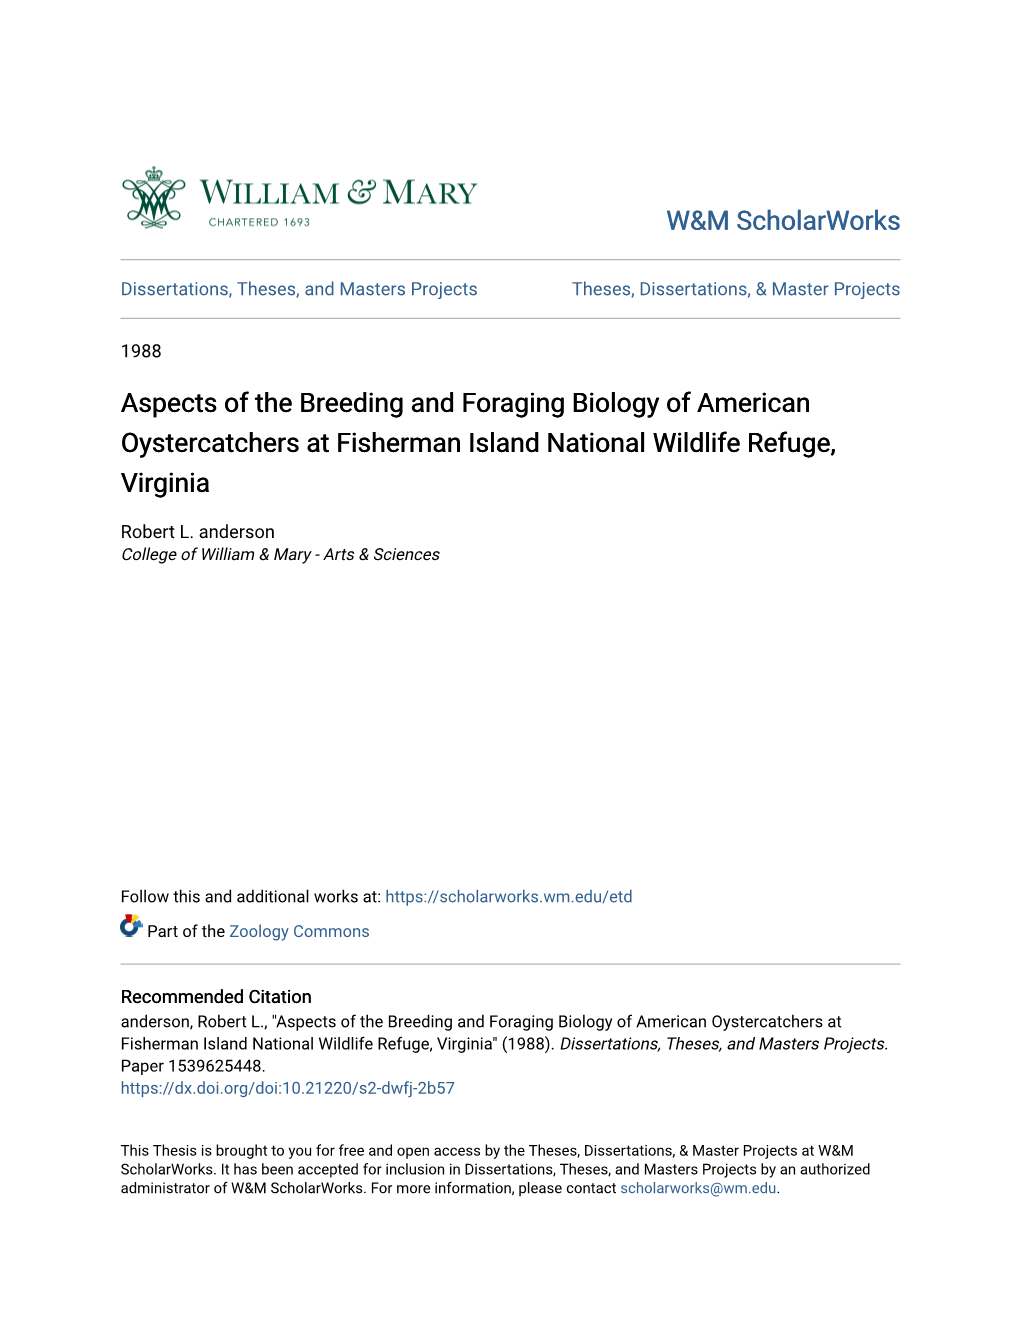 Aspects of the Breeding and Foraging Biology of American Oystercatchers at Fisherman Island National Wildlife Refuge, Virginia